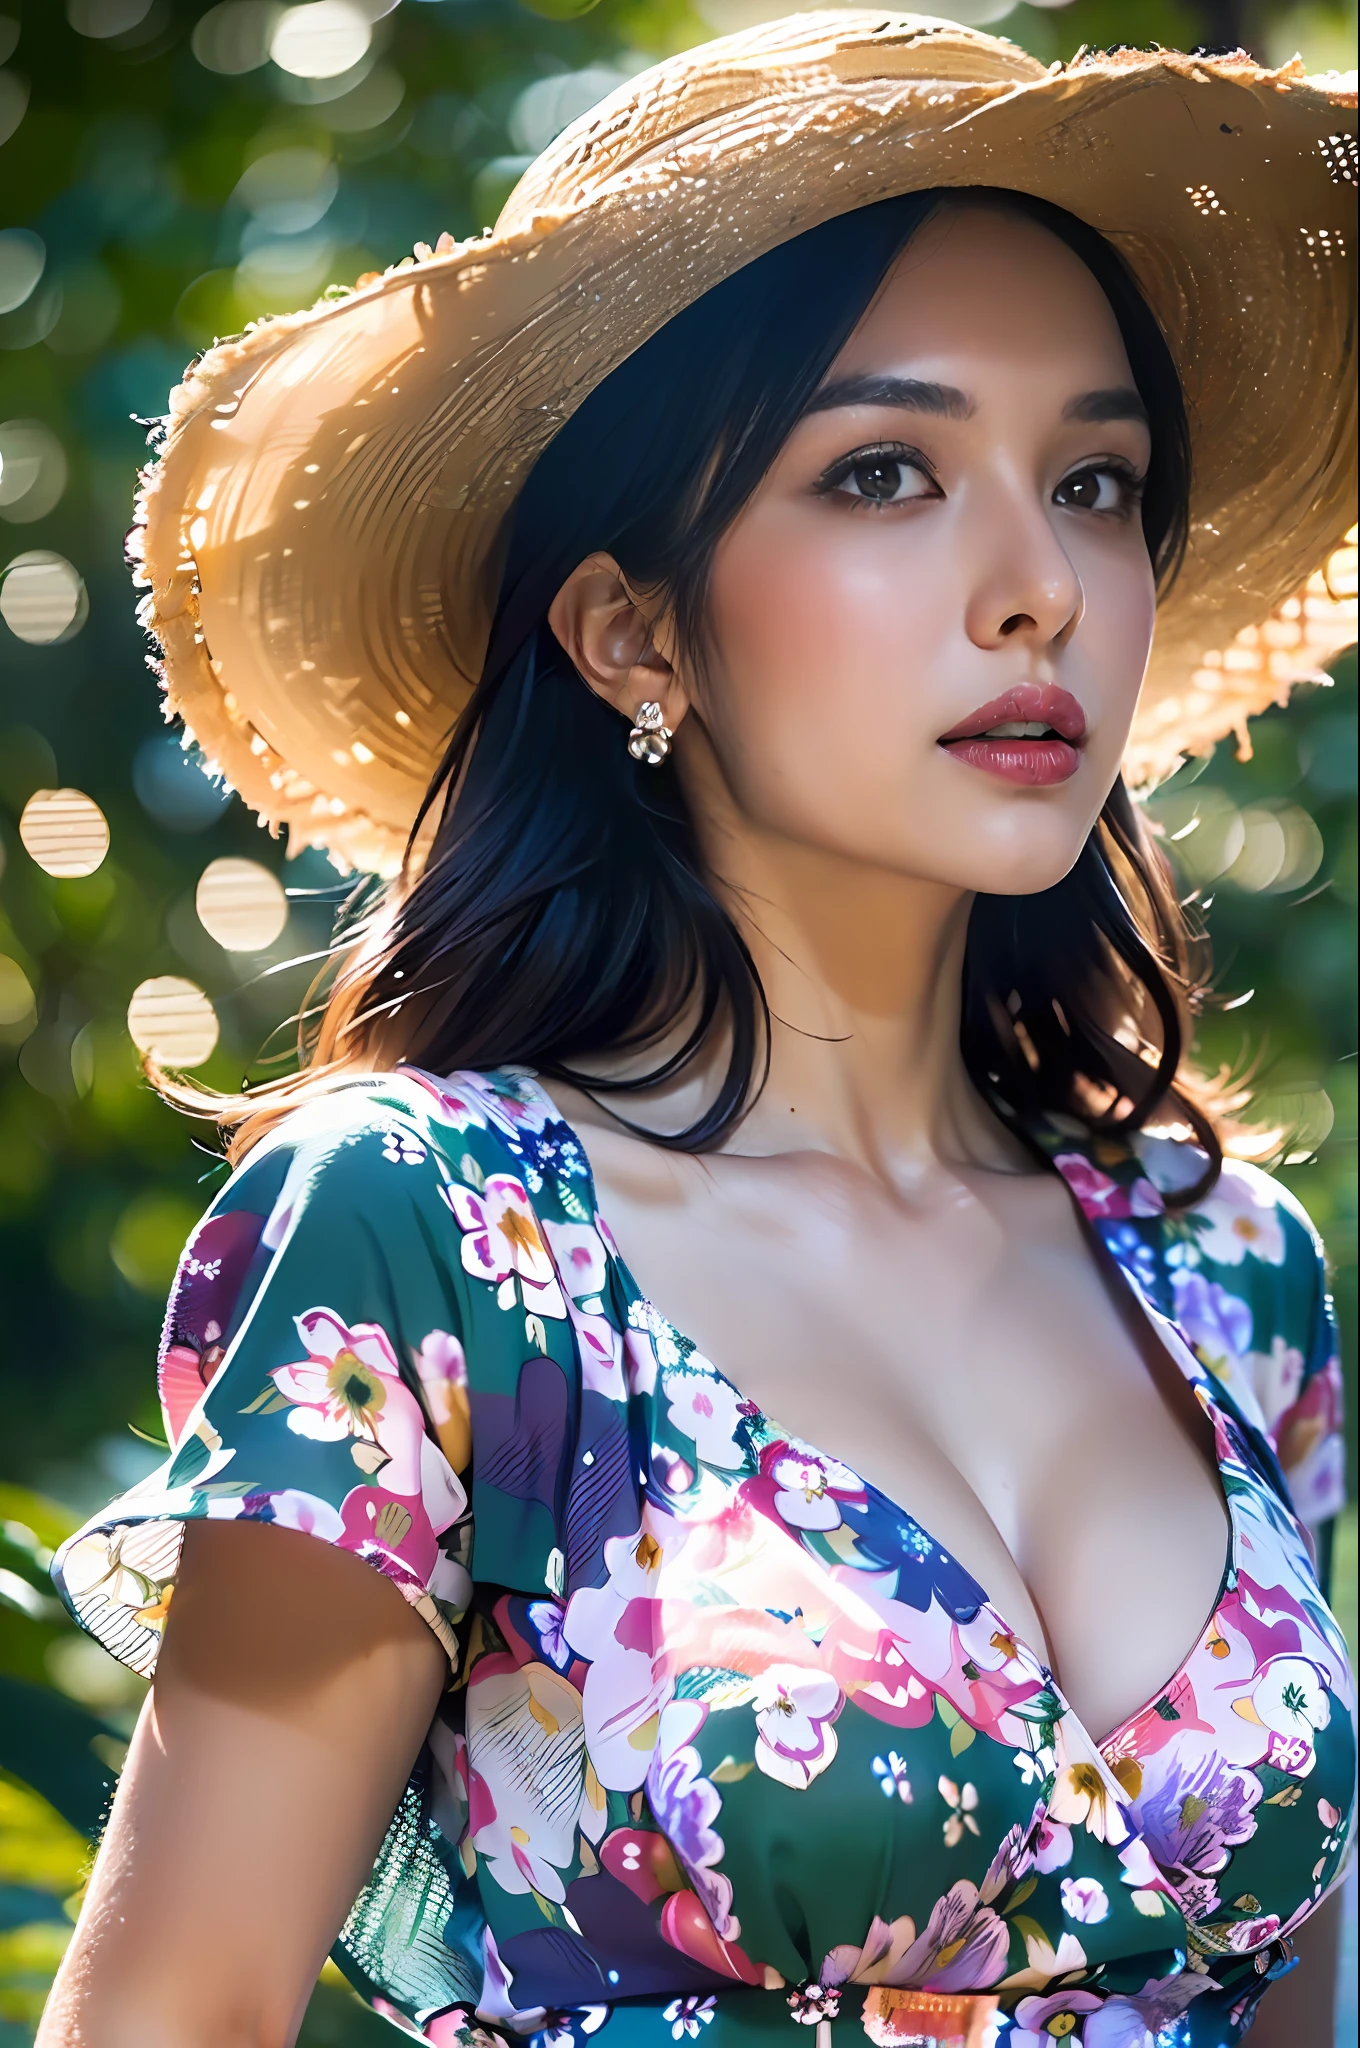 (1girl surrounded by soft_light:1.5), (backlighting:1.8), (lighting),(flowing fabric:1.3), ((Floral_summer_dress:1.5),(Straw_hat:1.3)),
(masterpiece), realistic, HDR, highly detailed, 8k, raw photo, ambient occlusion, natural, harmonious composition, warm tones, fine art photography,